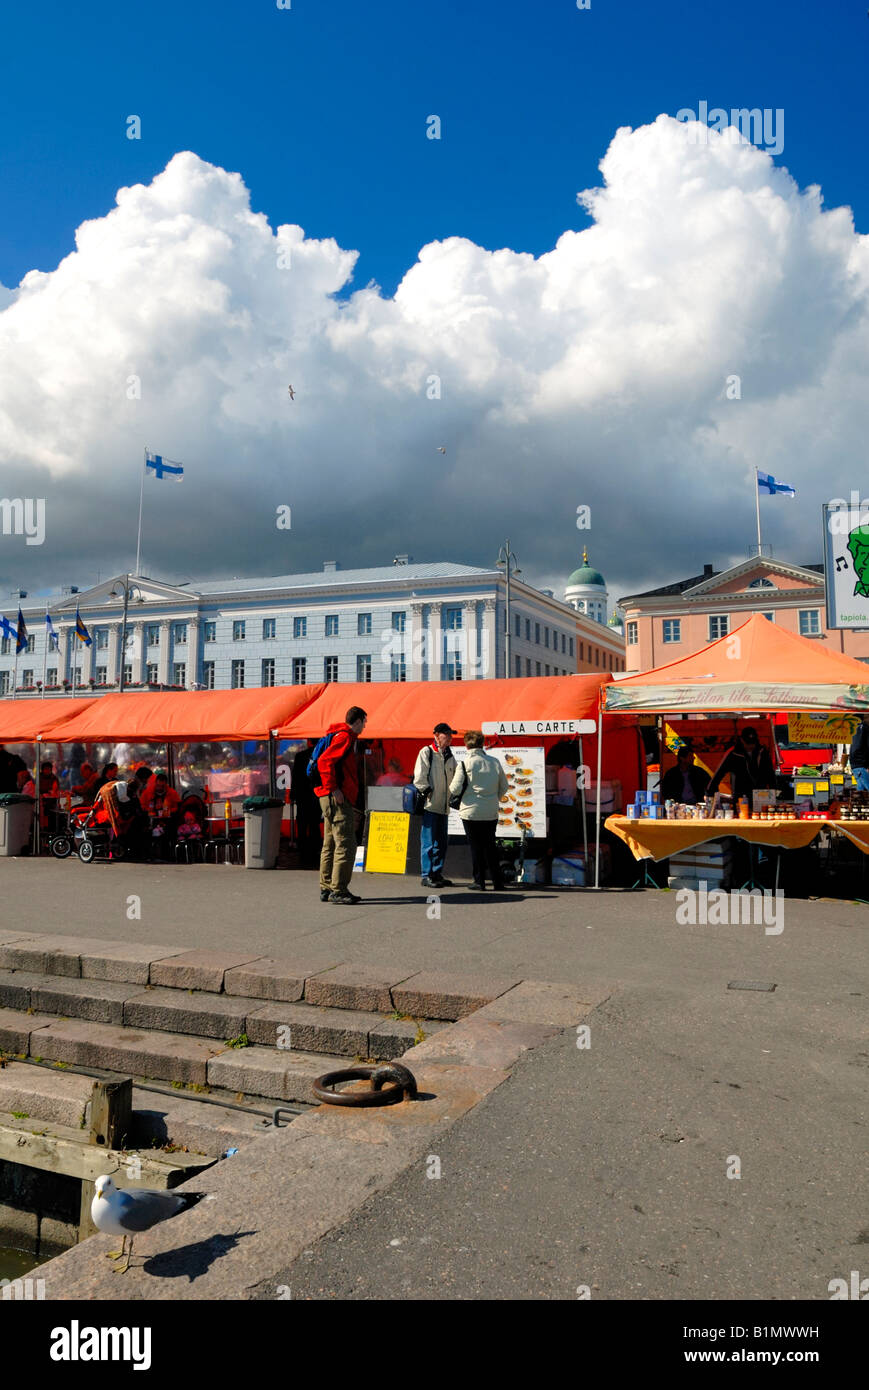 The Kauppatori market square and the rising storm, Helsinki, Finland, Europe. Stock Photo